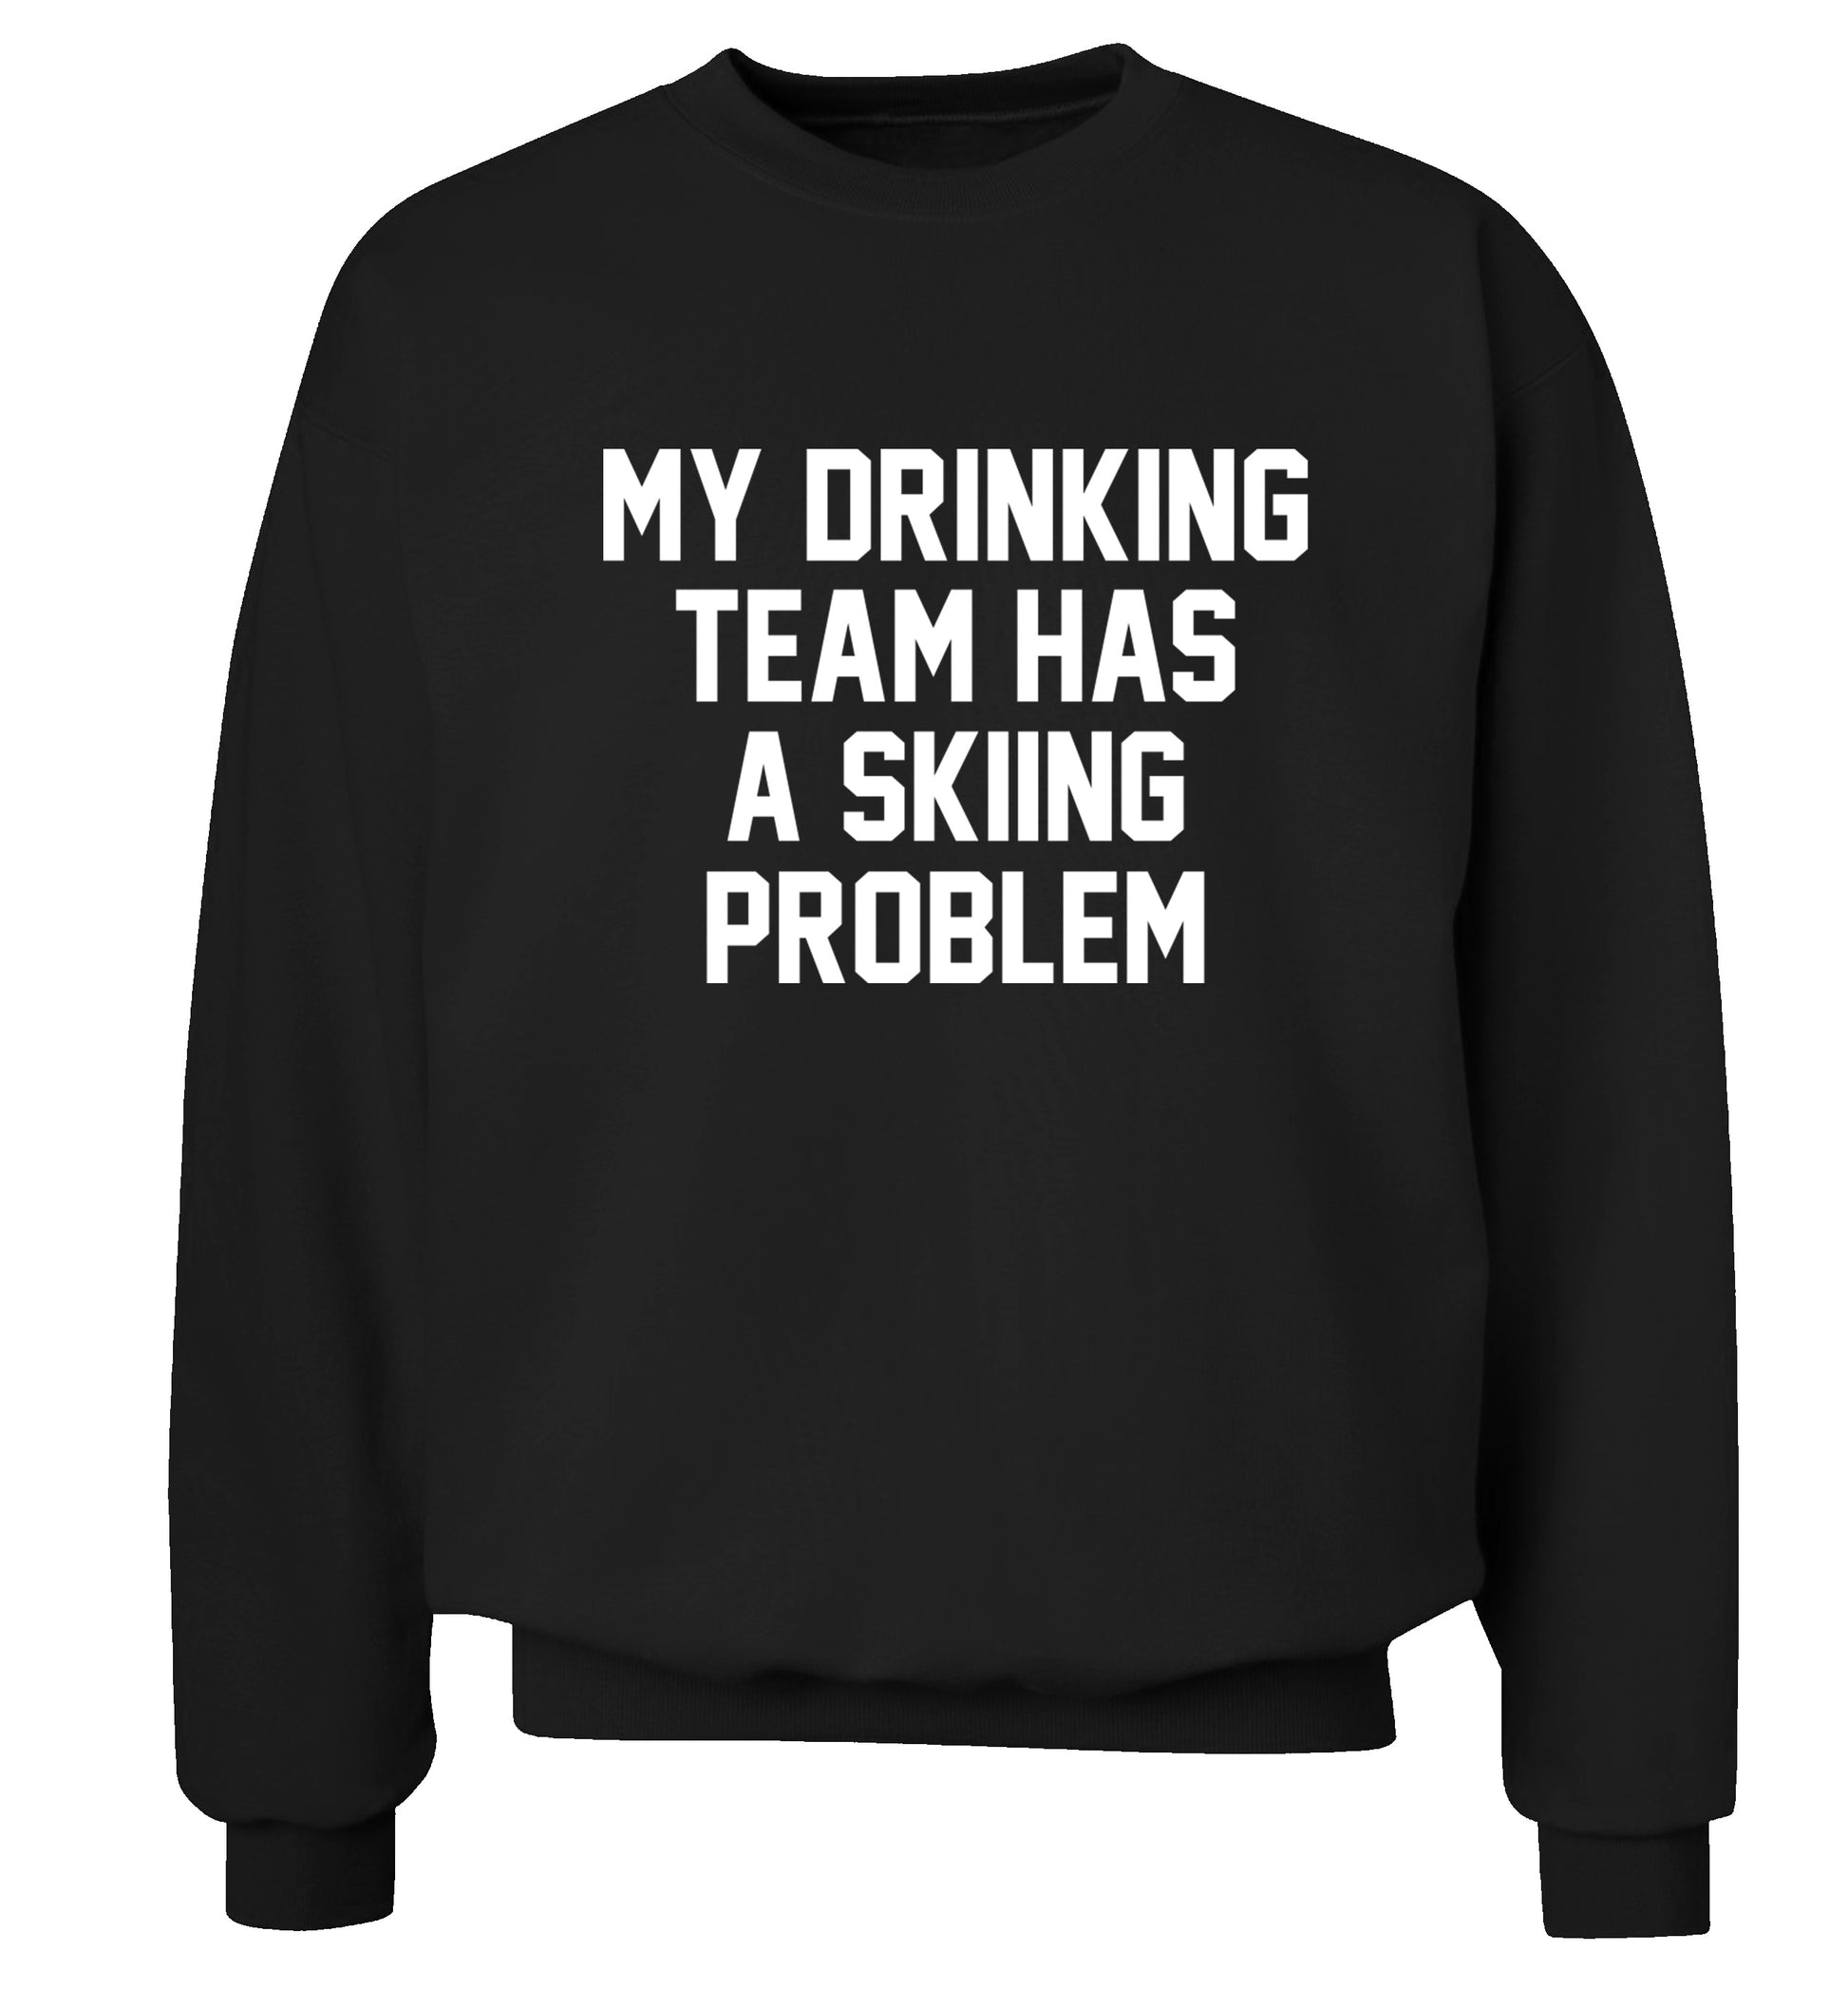 My drinking team has a skiing problem Adult's unisexblack Sweater 2XL